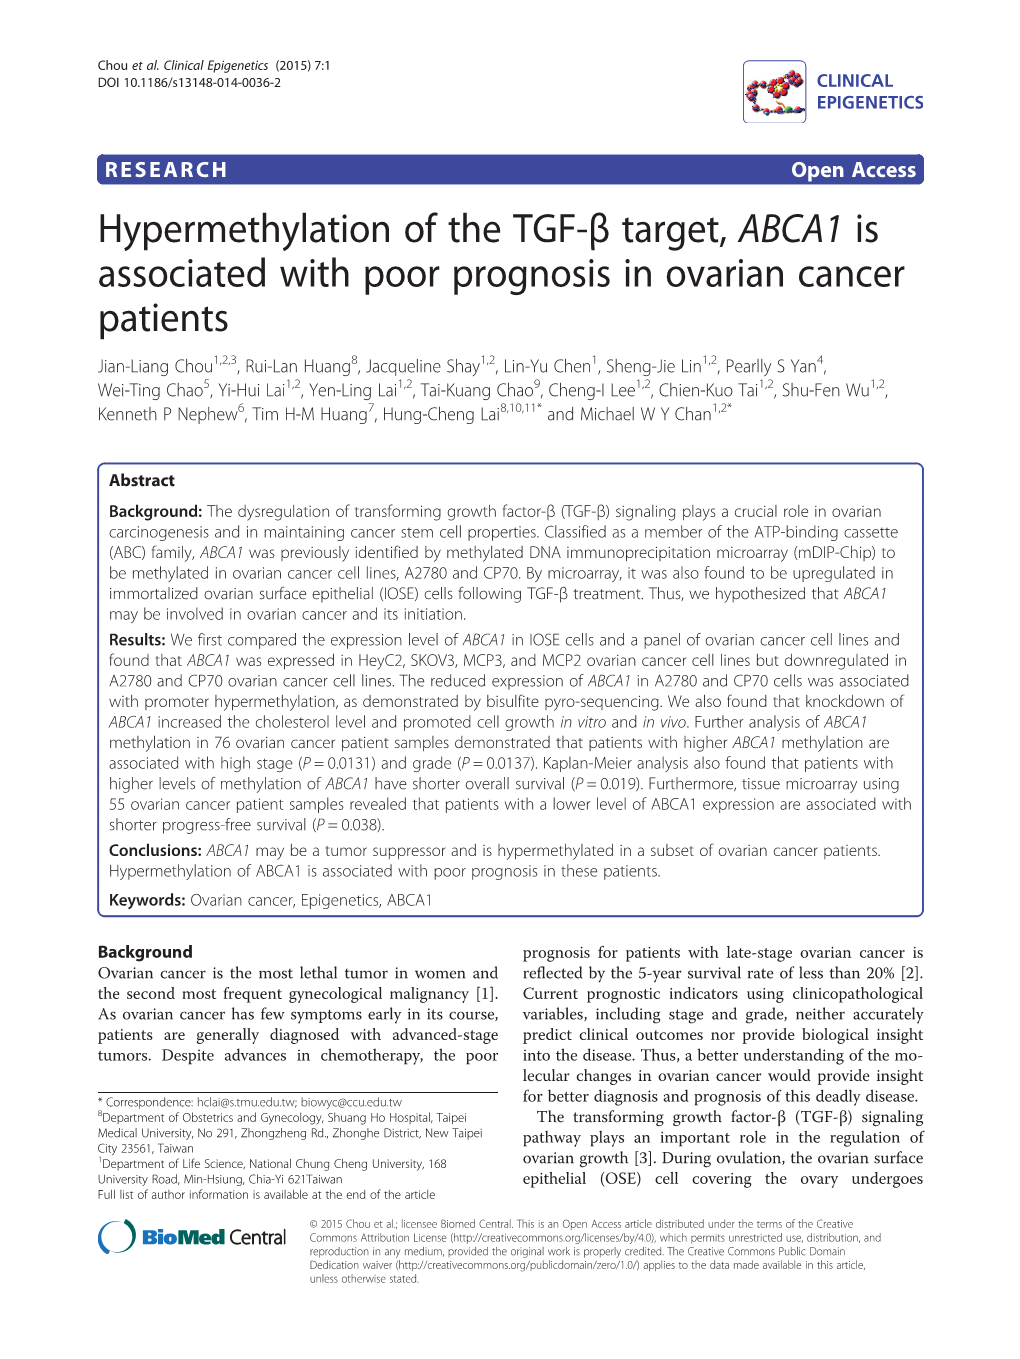 Hypermethylation of the TGF-Β Target, ABCA1 Is Associated with Poor